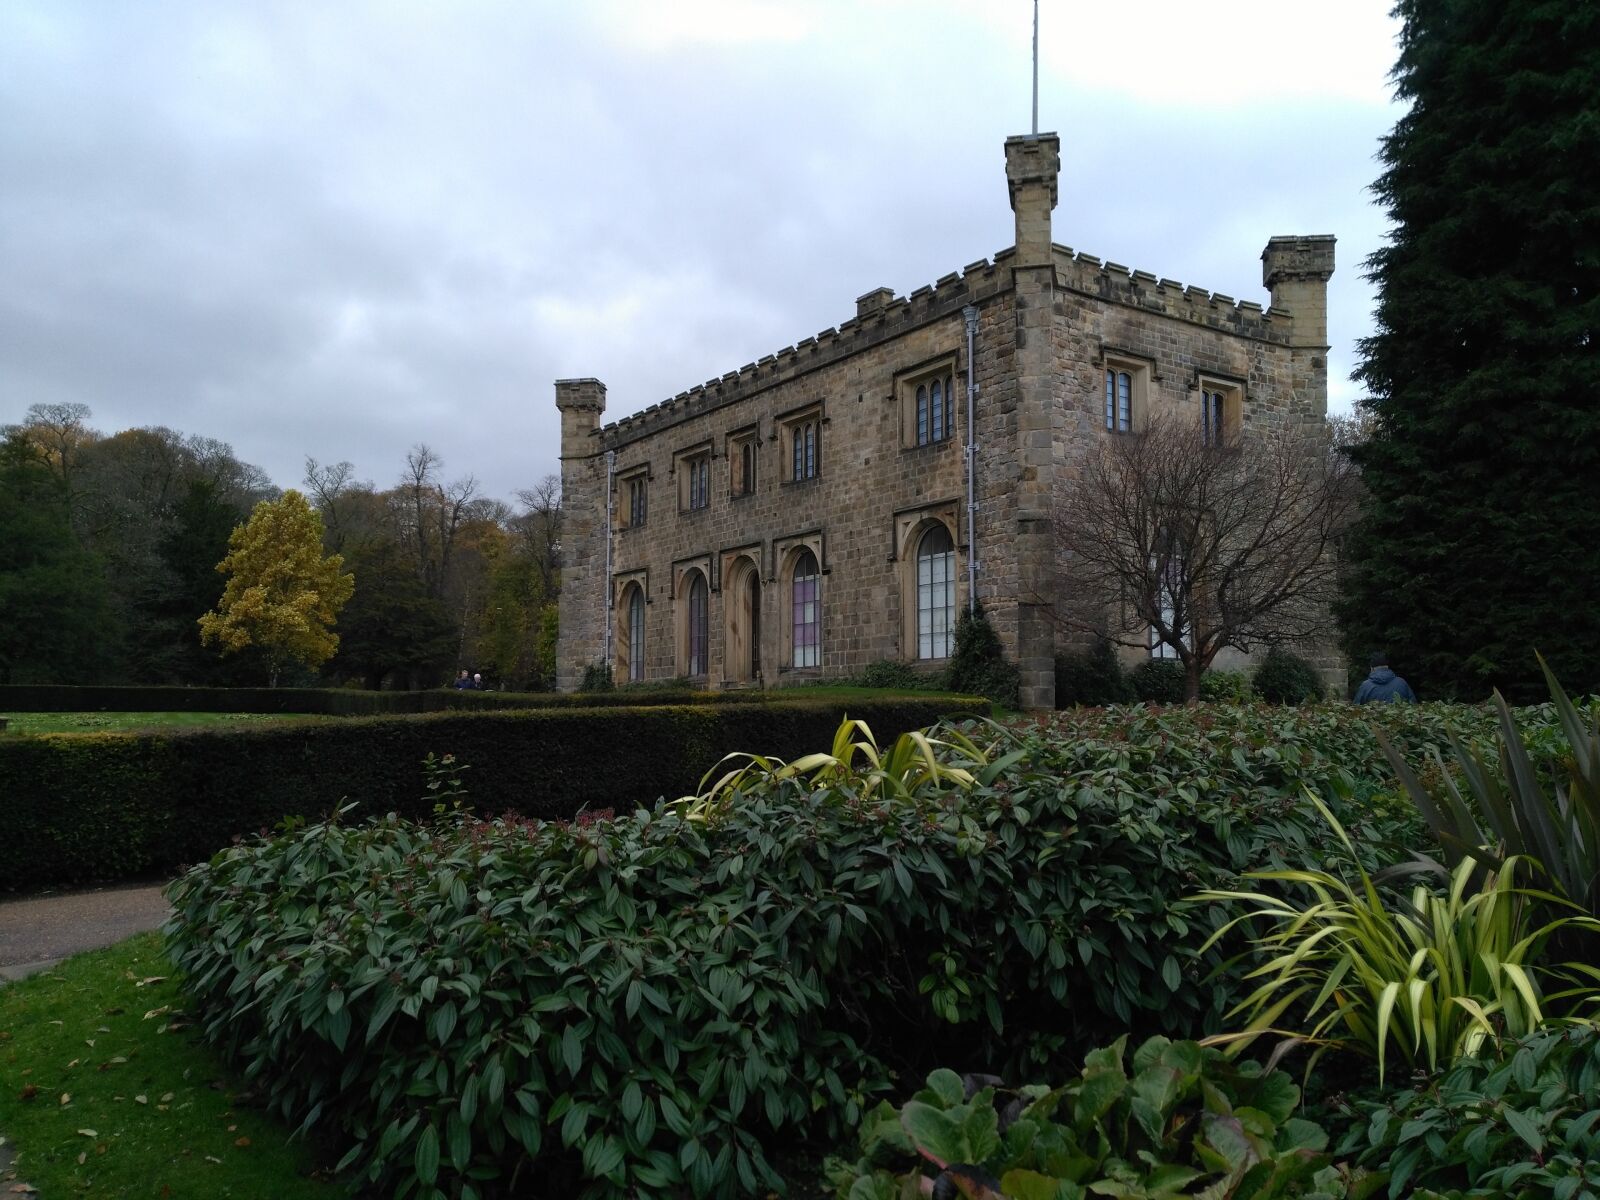 HUAWEI Honor 5X sample photo. Townley hall, burnley, lancashire photography